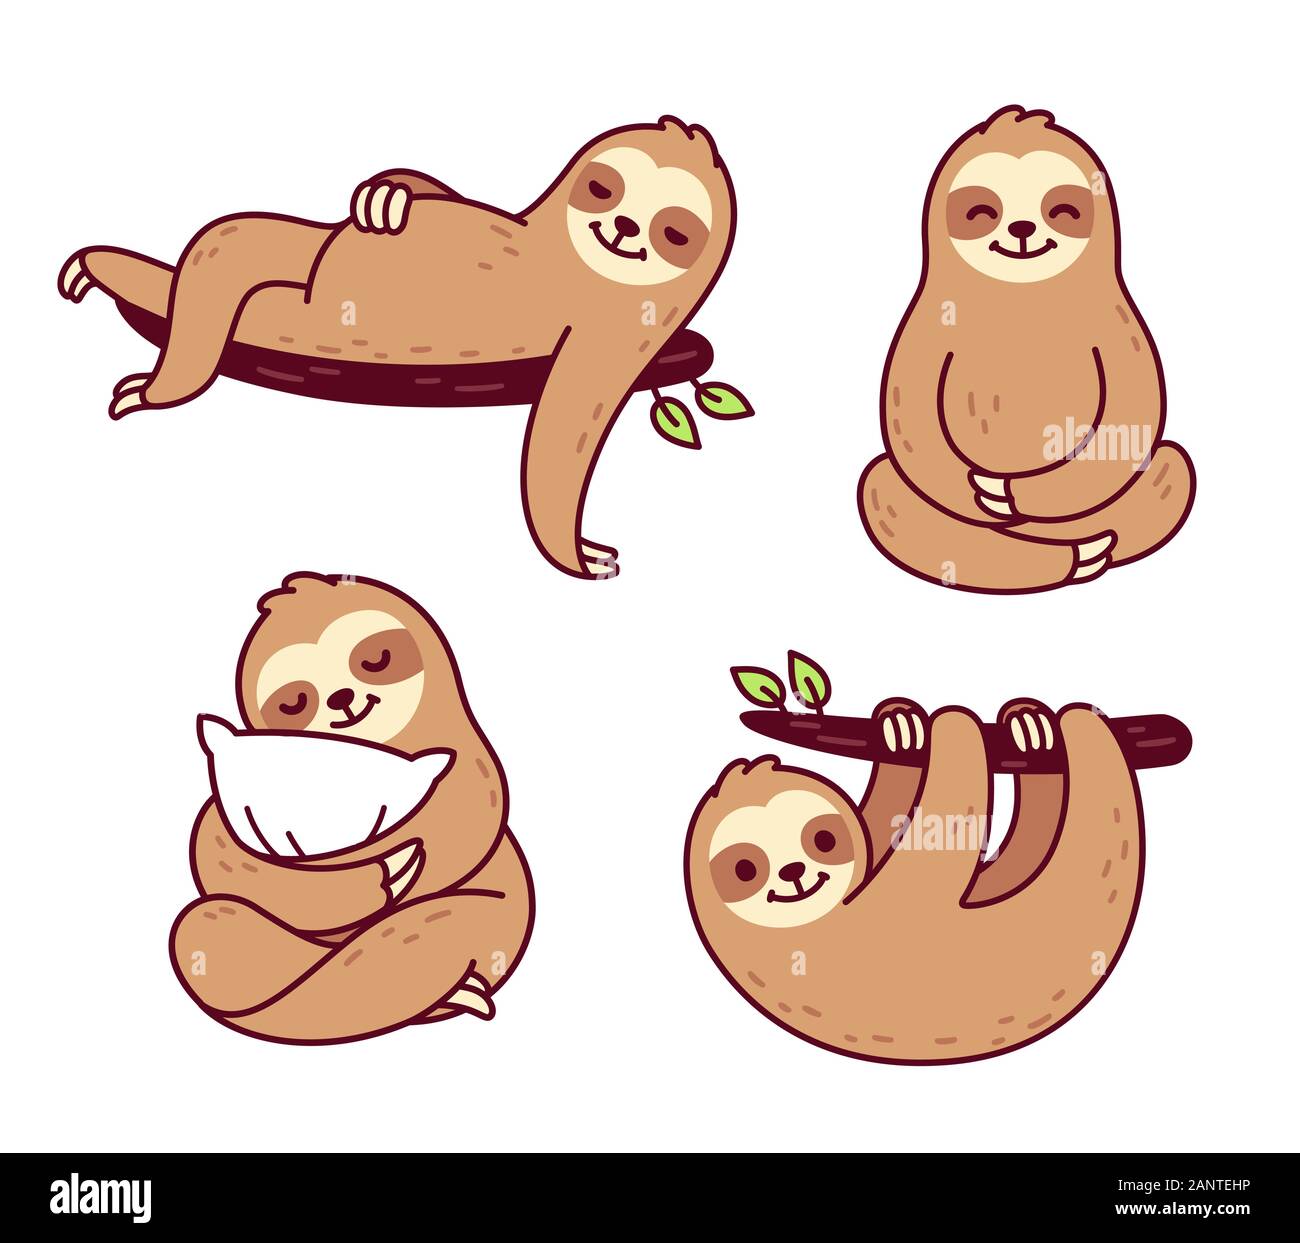 Cute cartoon sloth character drawing set. Hanging from tree branch ...